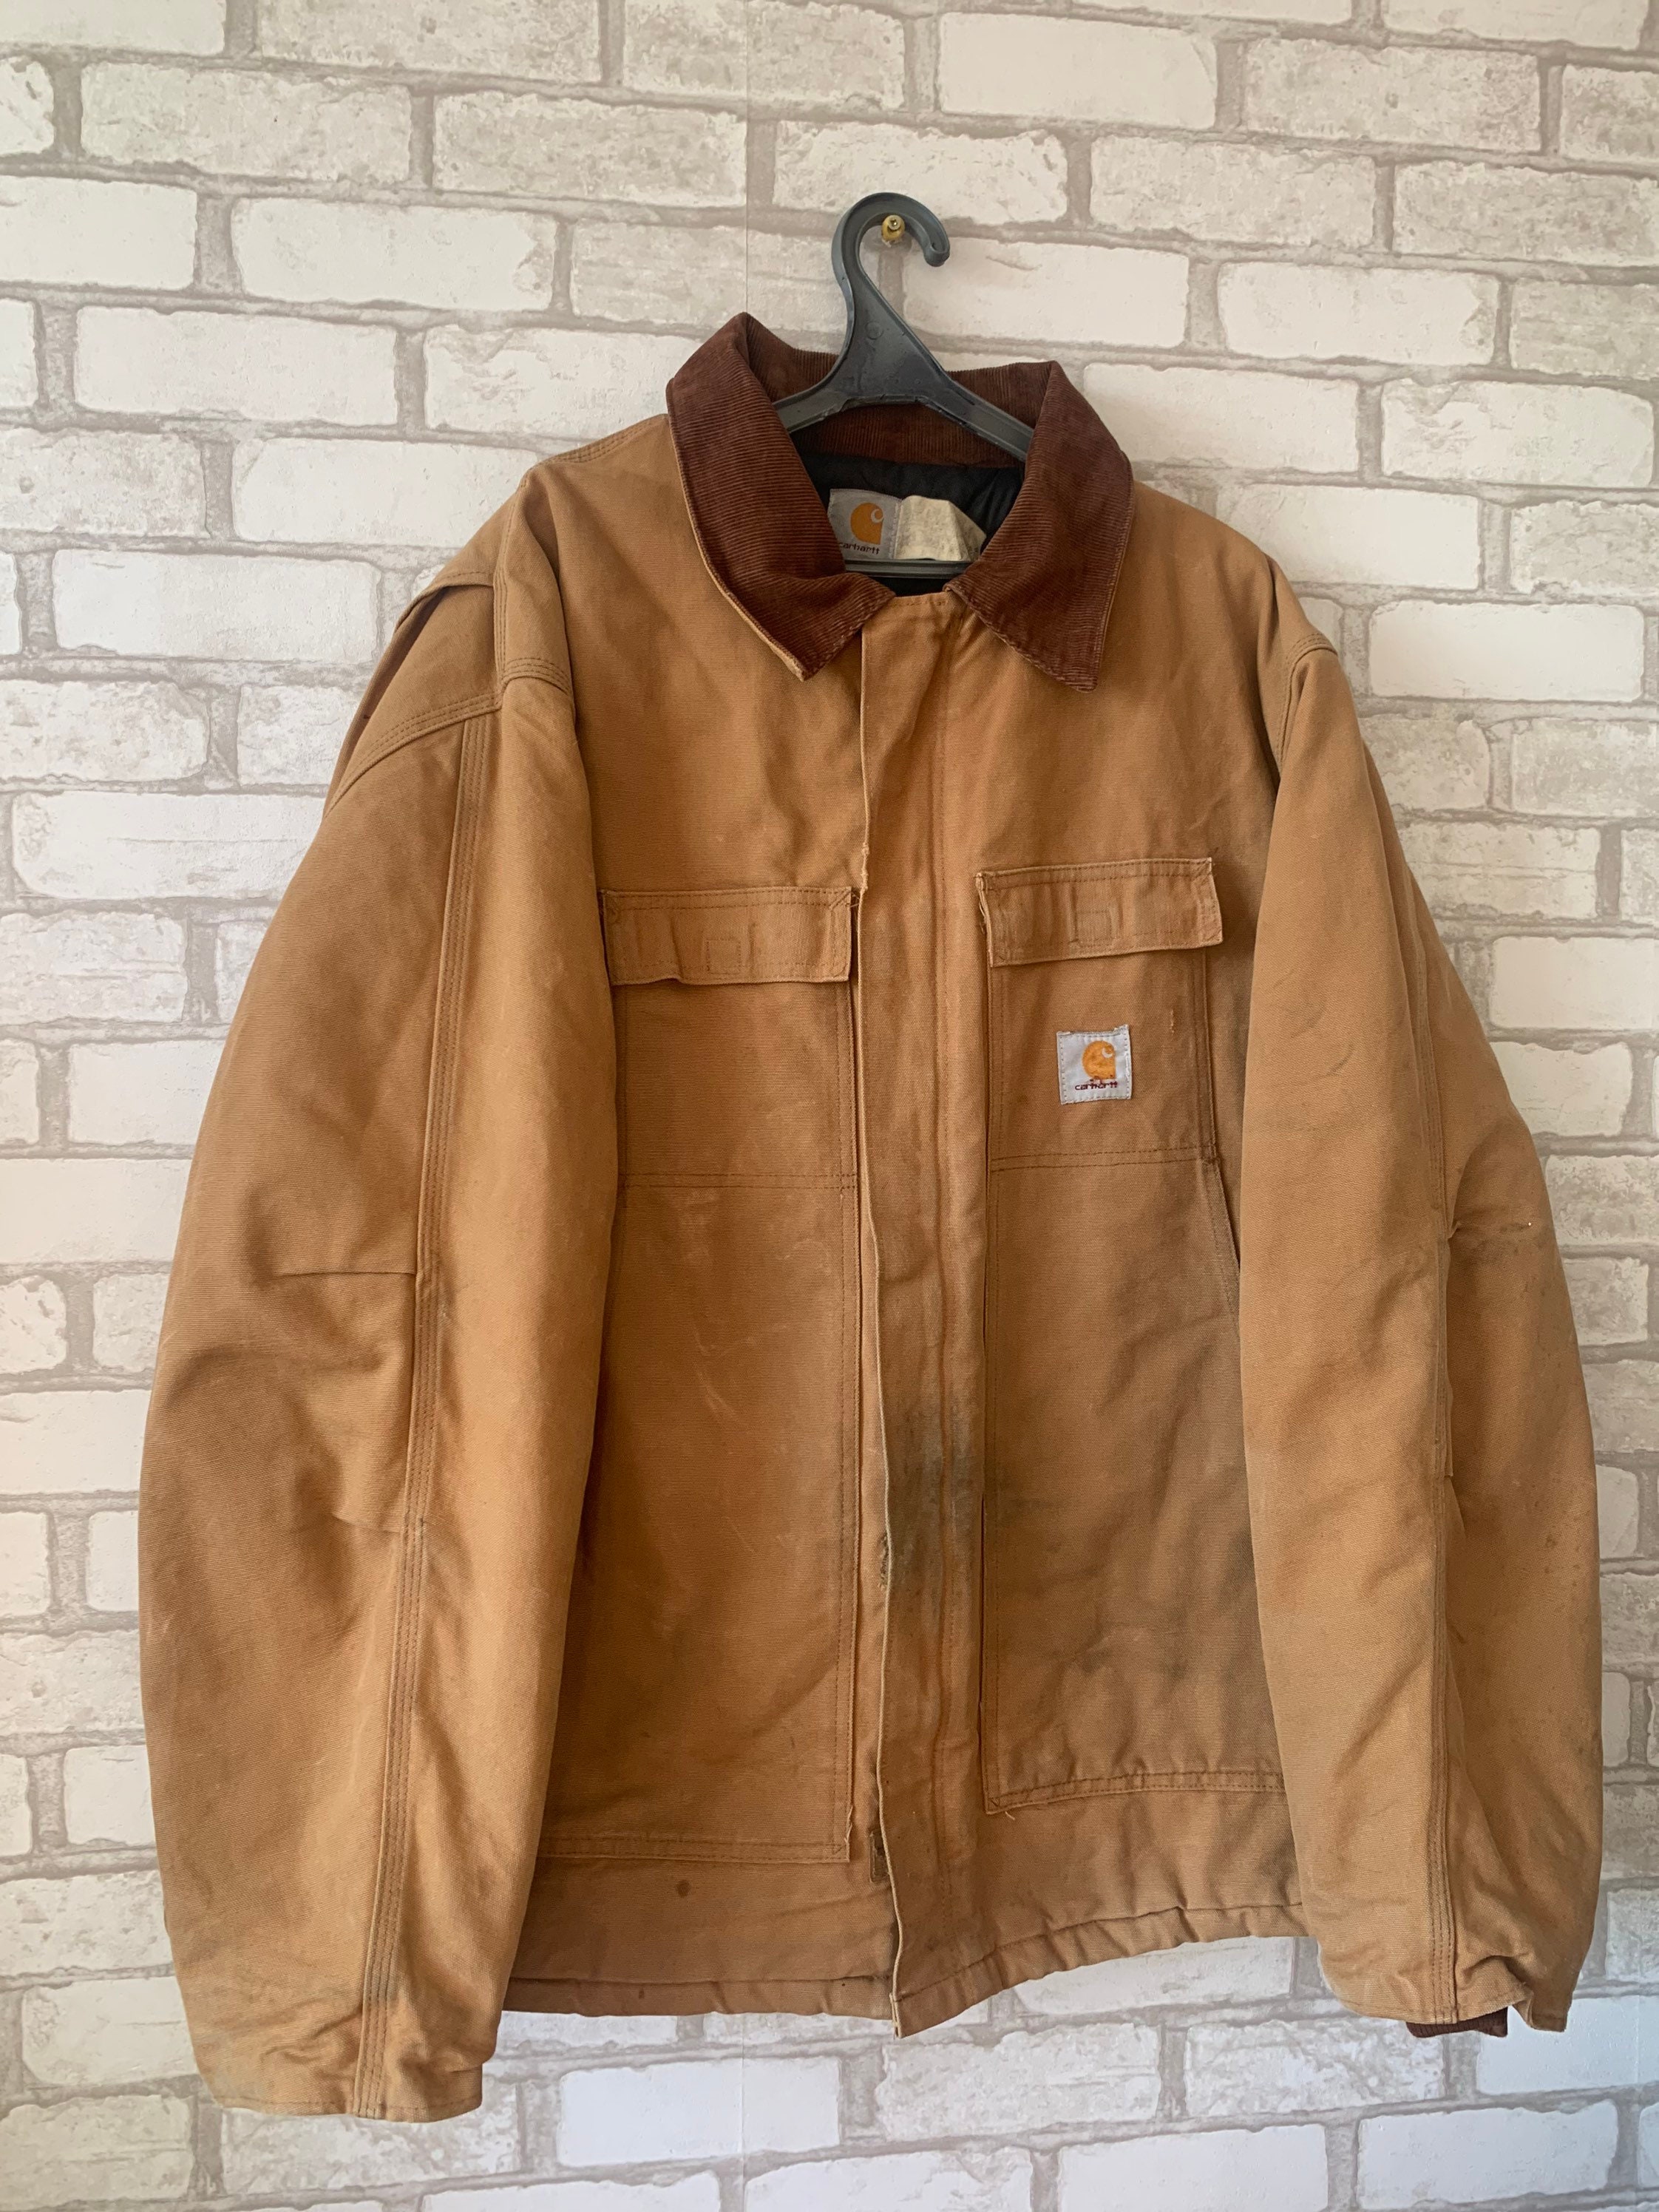 Carhartt Vintage Arctic Work Jacket Chore Made in USA 1990s - Etsy